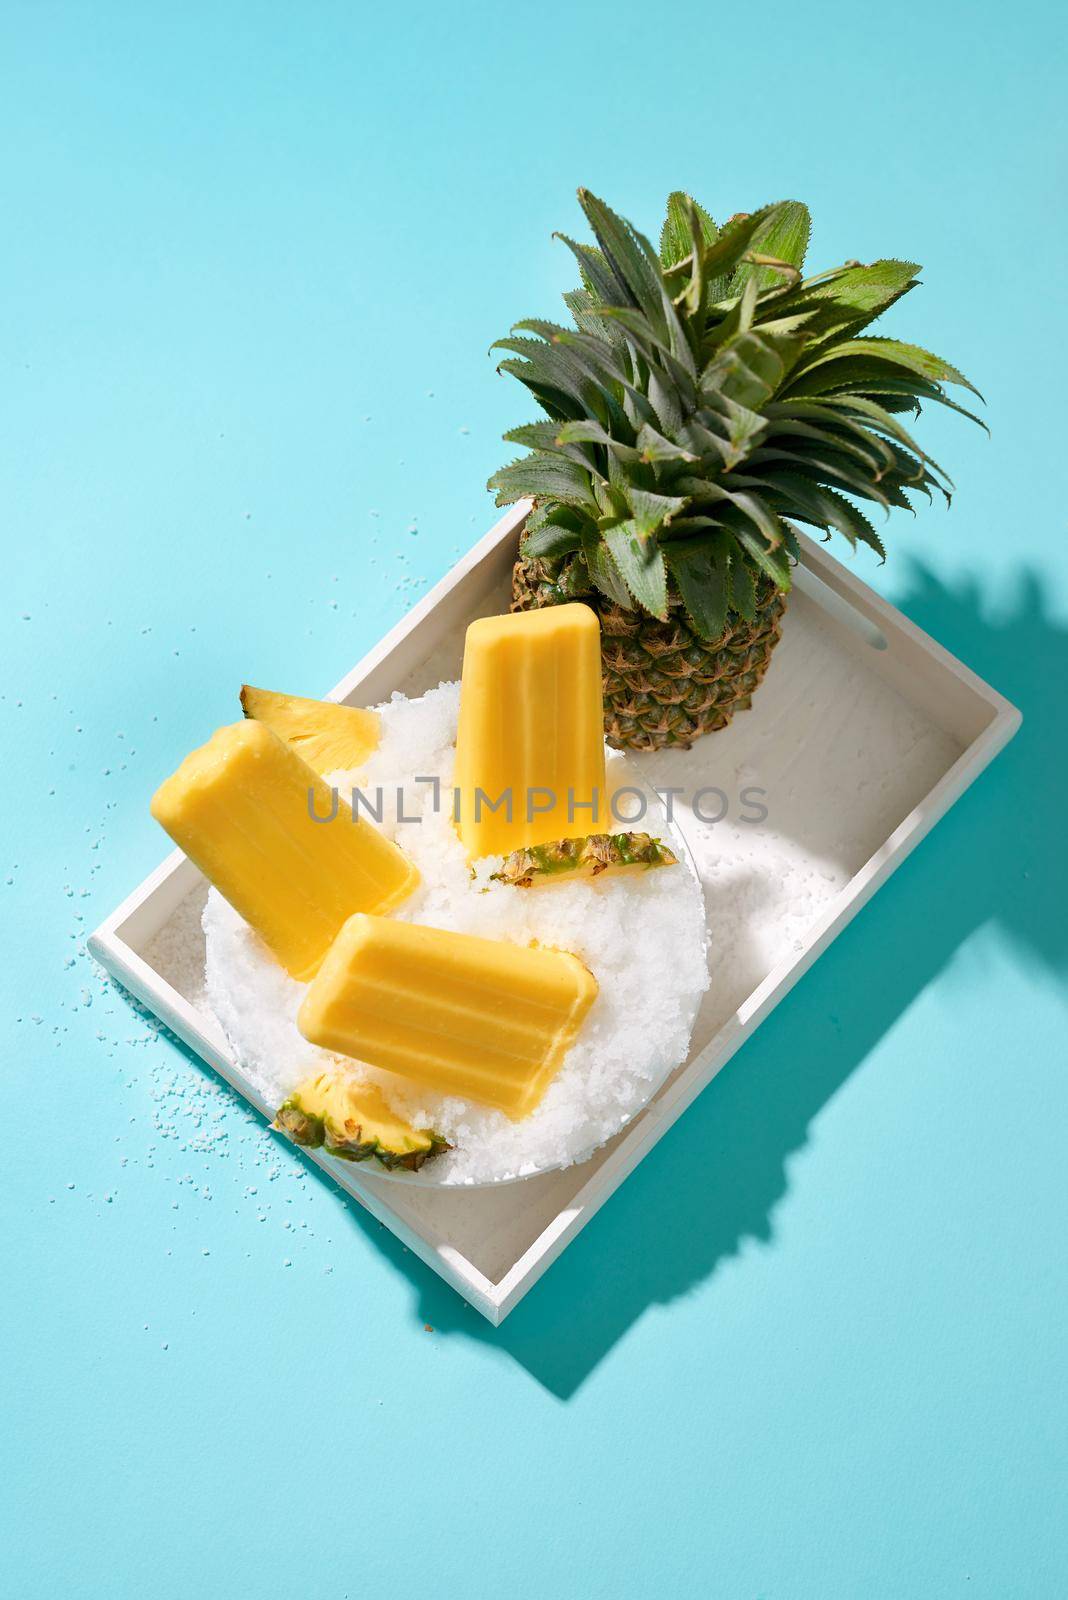 Fruit pineapple ice cream on a stick. Bright color, summer mood